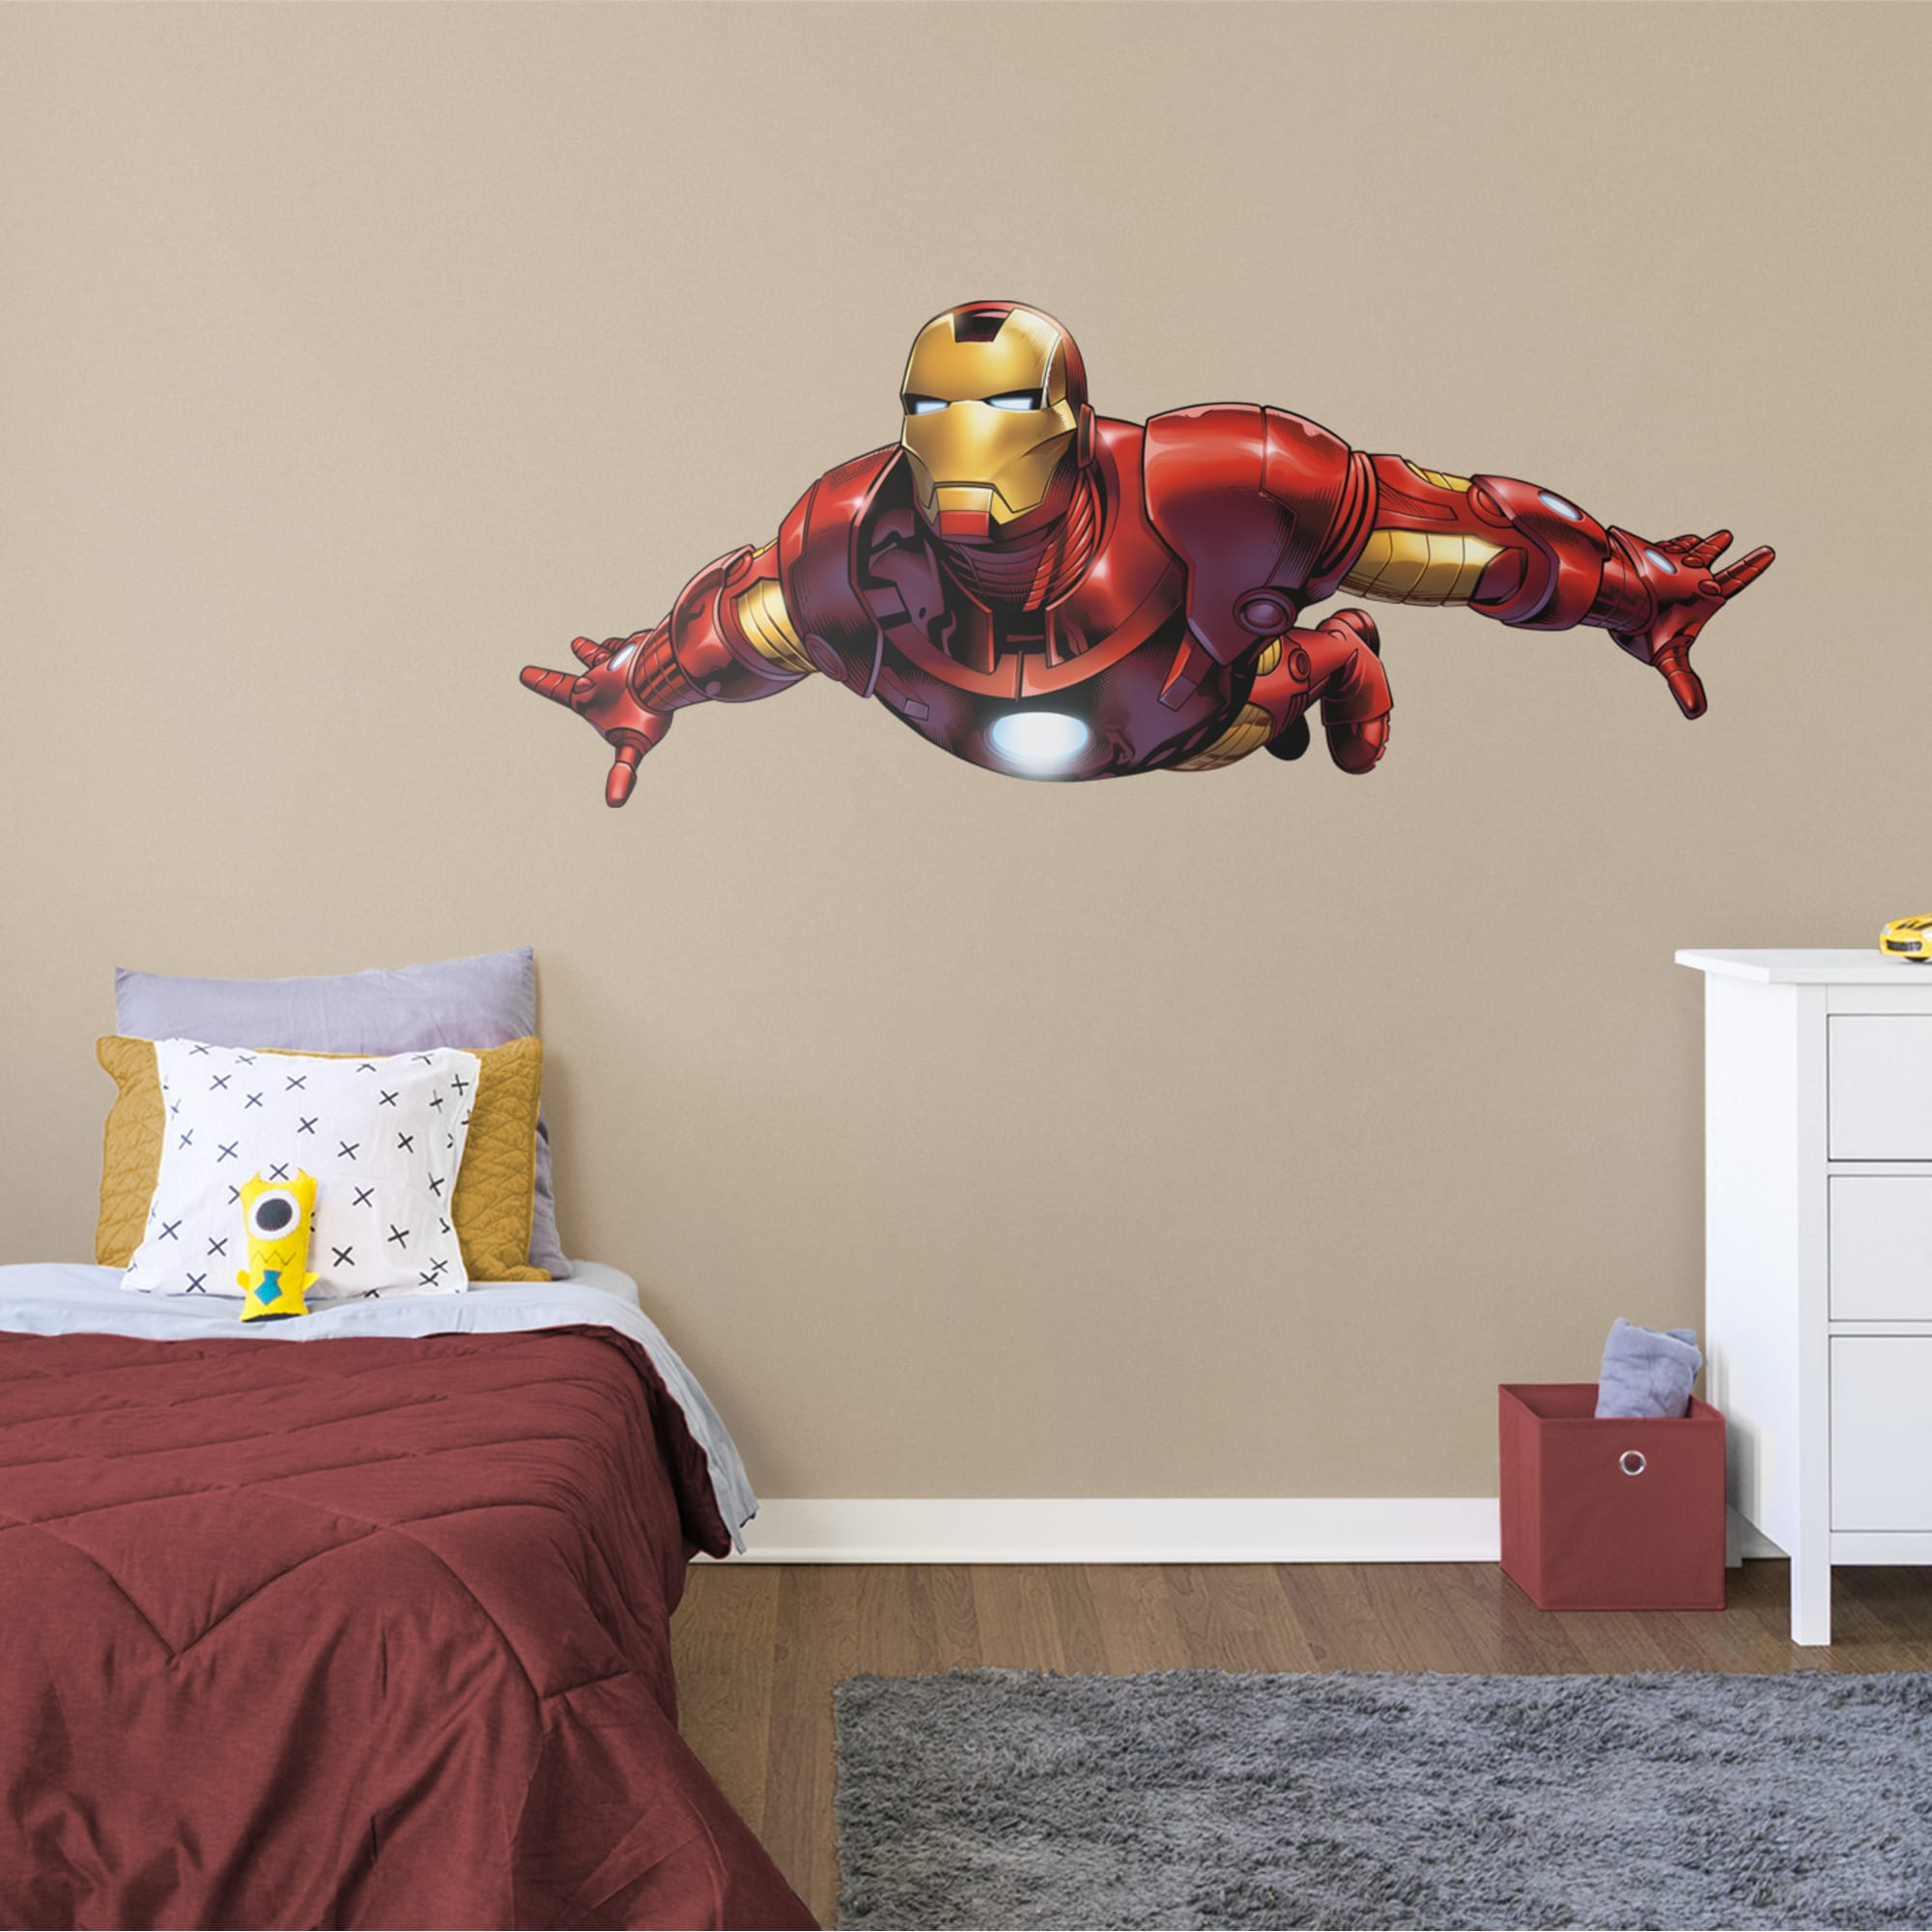 Iron Man: Flying - Officially Licensed Removable Wall Decal Life-Size Character (78"W x 32"H) by Fathead | Vinyl